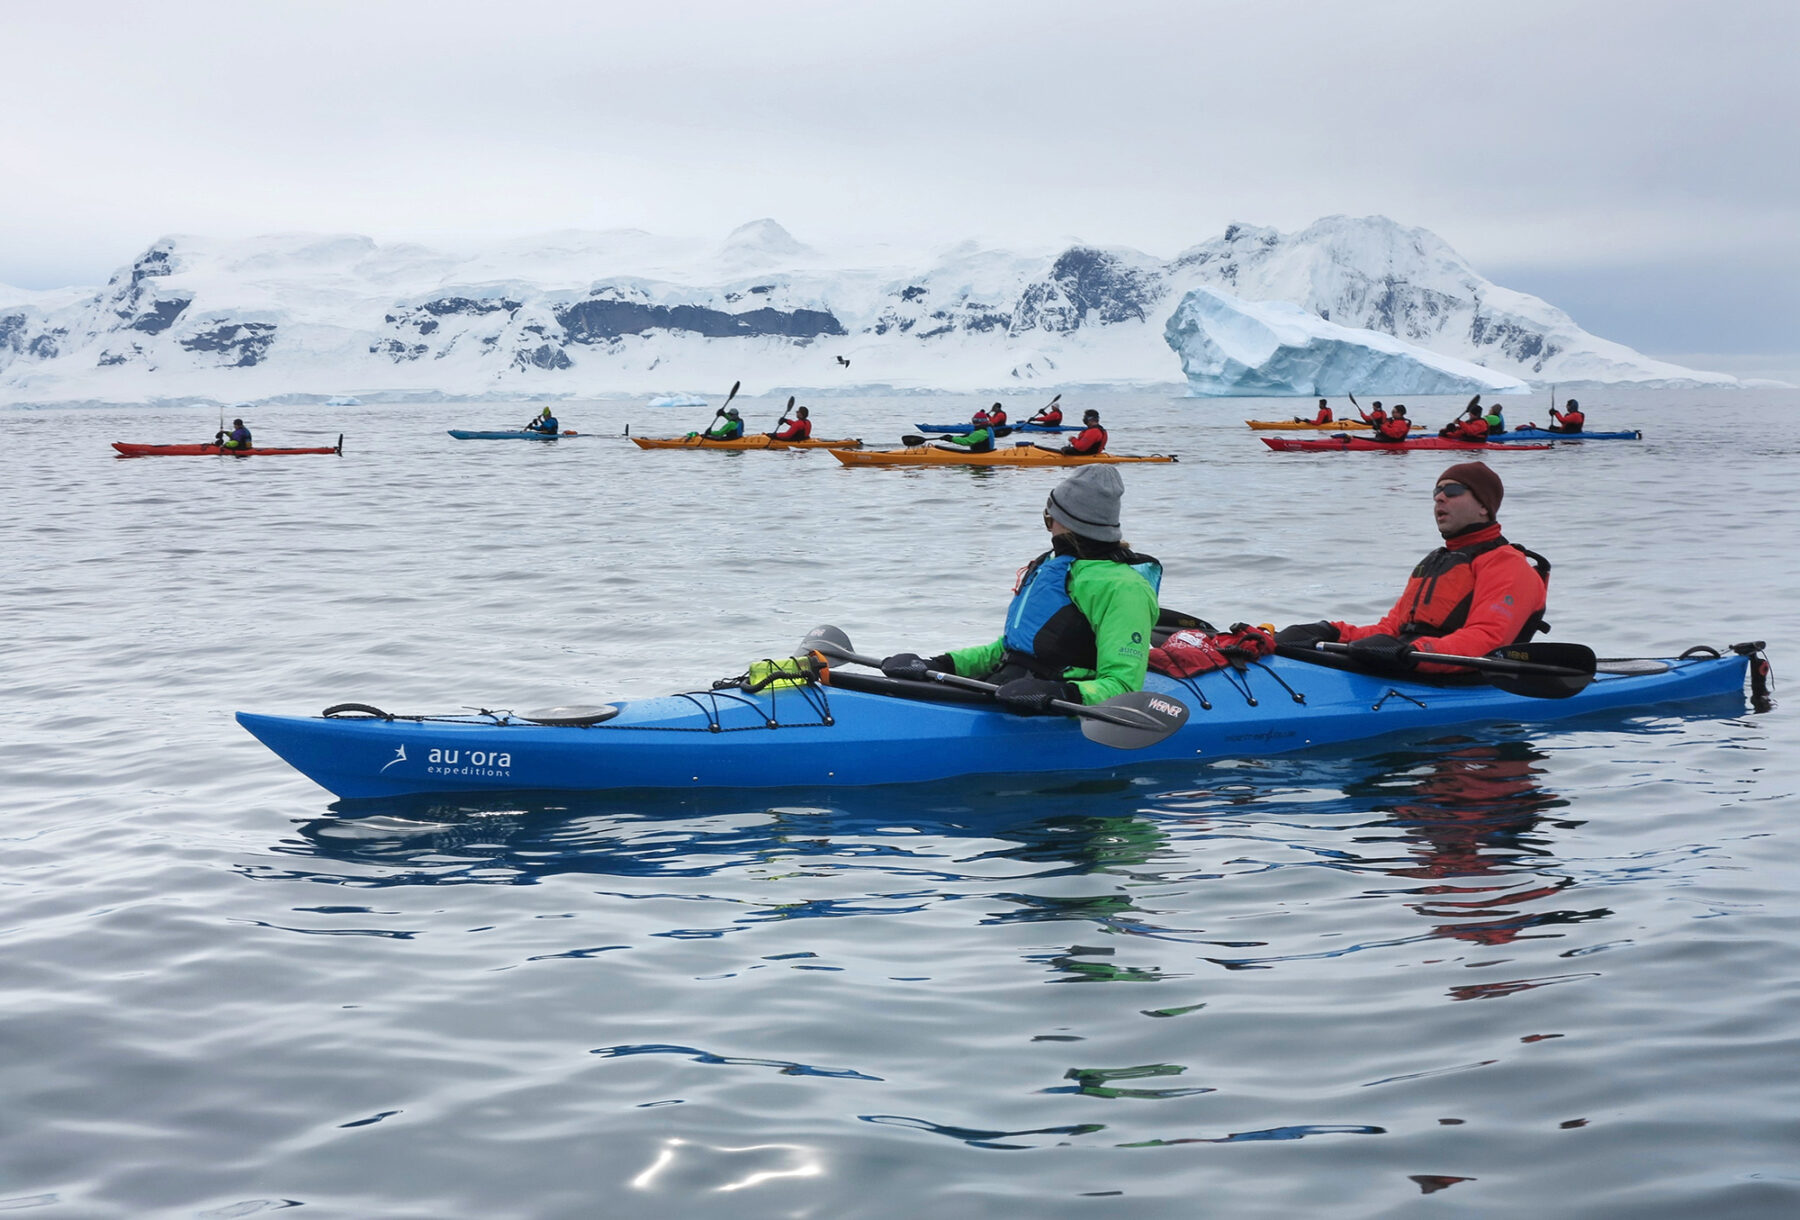 A private audience with the land of ice: Kayaking in Antarctica